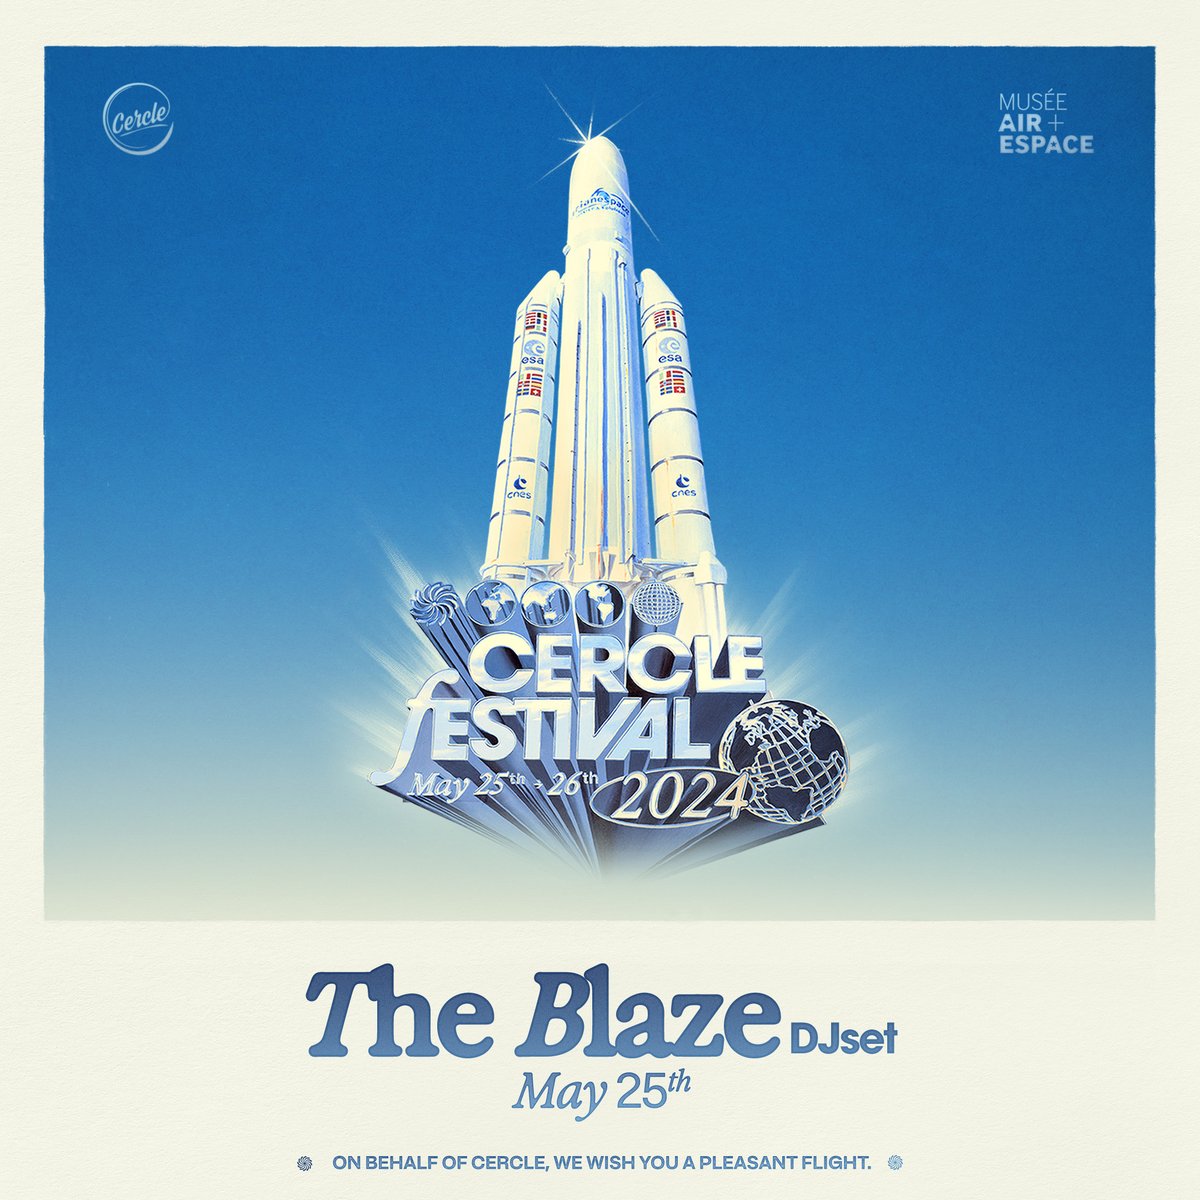 The iconic duo, The Blaze, will be performing a dj set at Cercle Festival, on Saturday May 25th. Welcome on board, dear @TheBlaze_Prod ❤️❤️